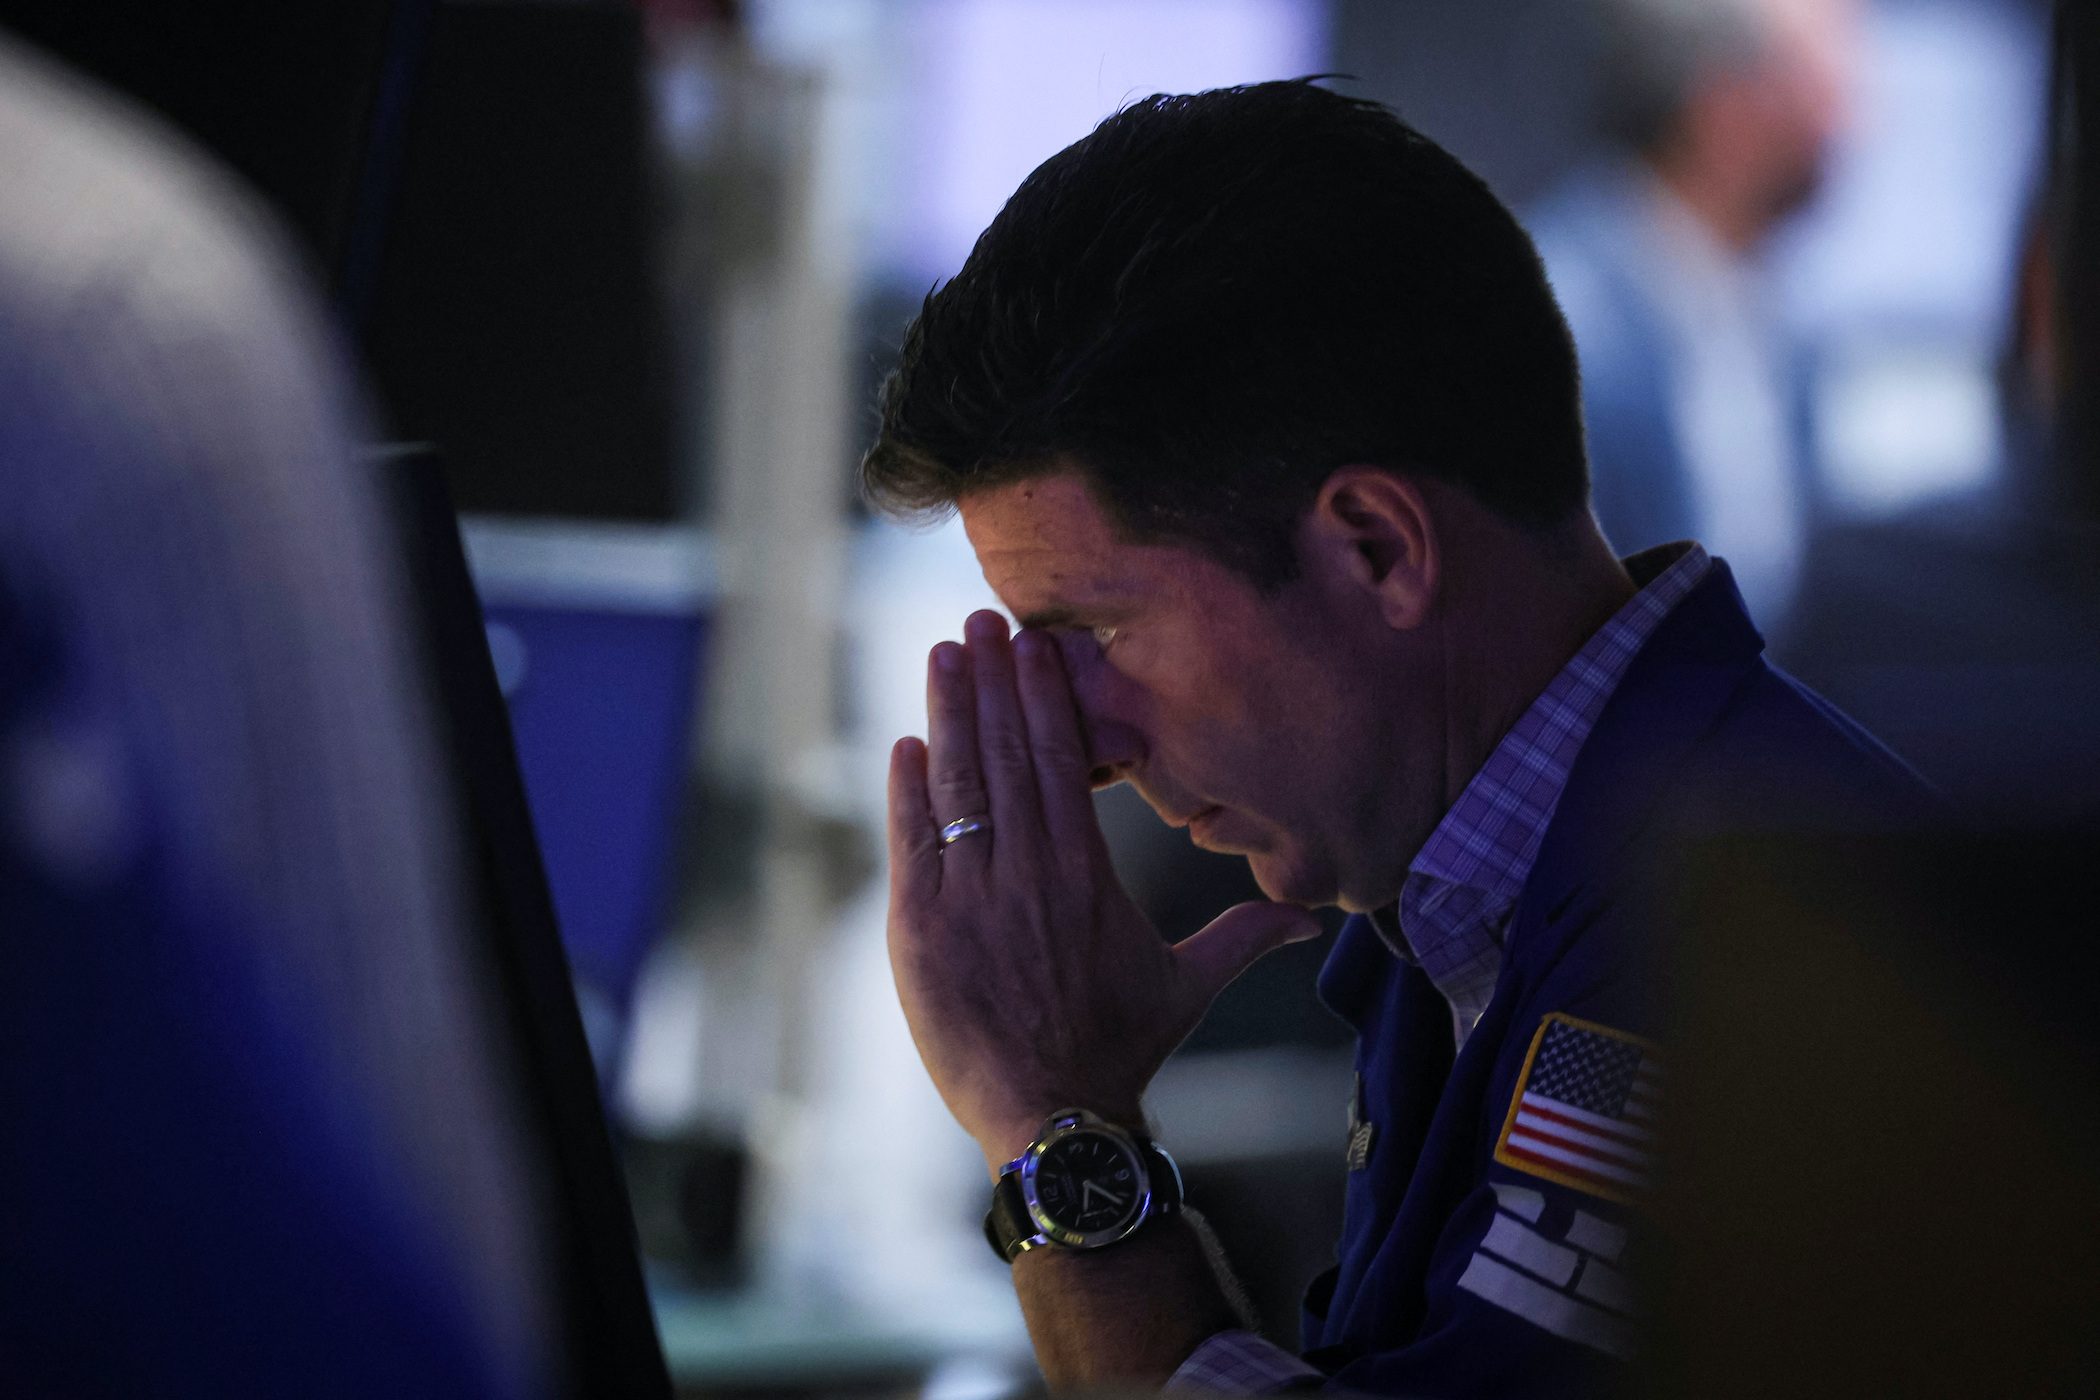 Stocks tumble, dollar soars, and bonds plunge as recession fears grow